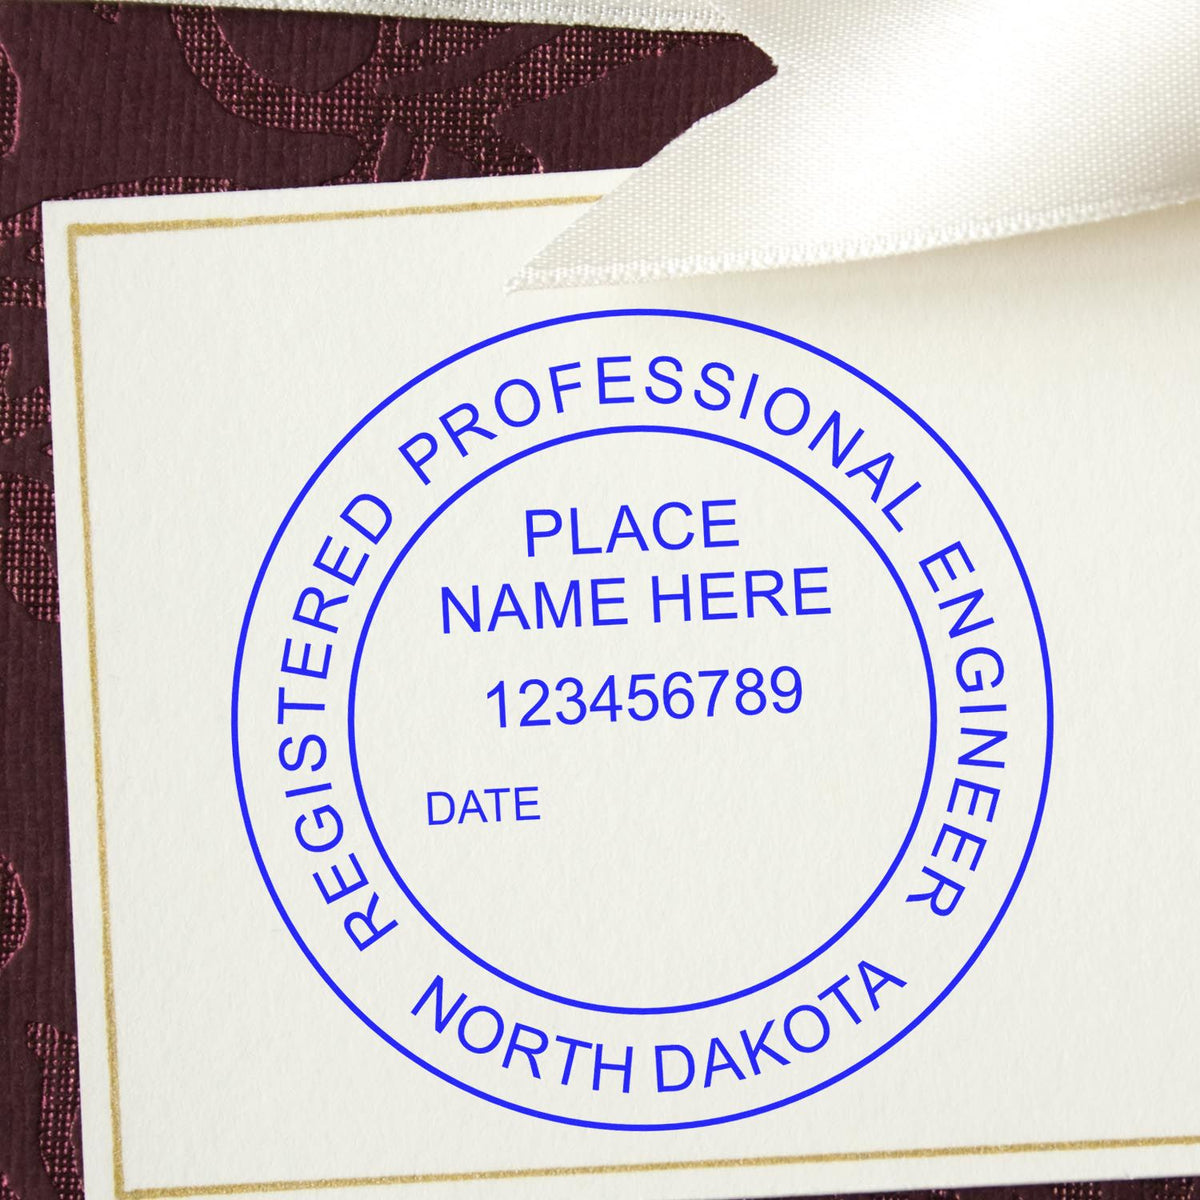 An alternative view of the North Dakota Professional Engineer Seal Stamp stamped on a sheet of paper showing the image in use